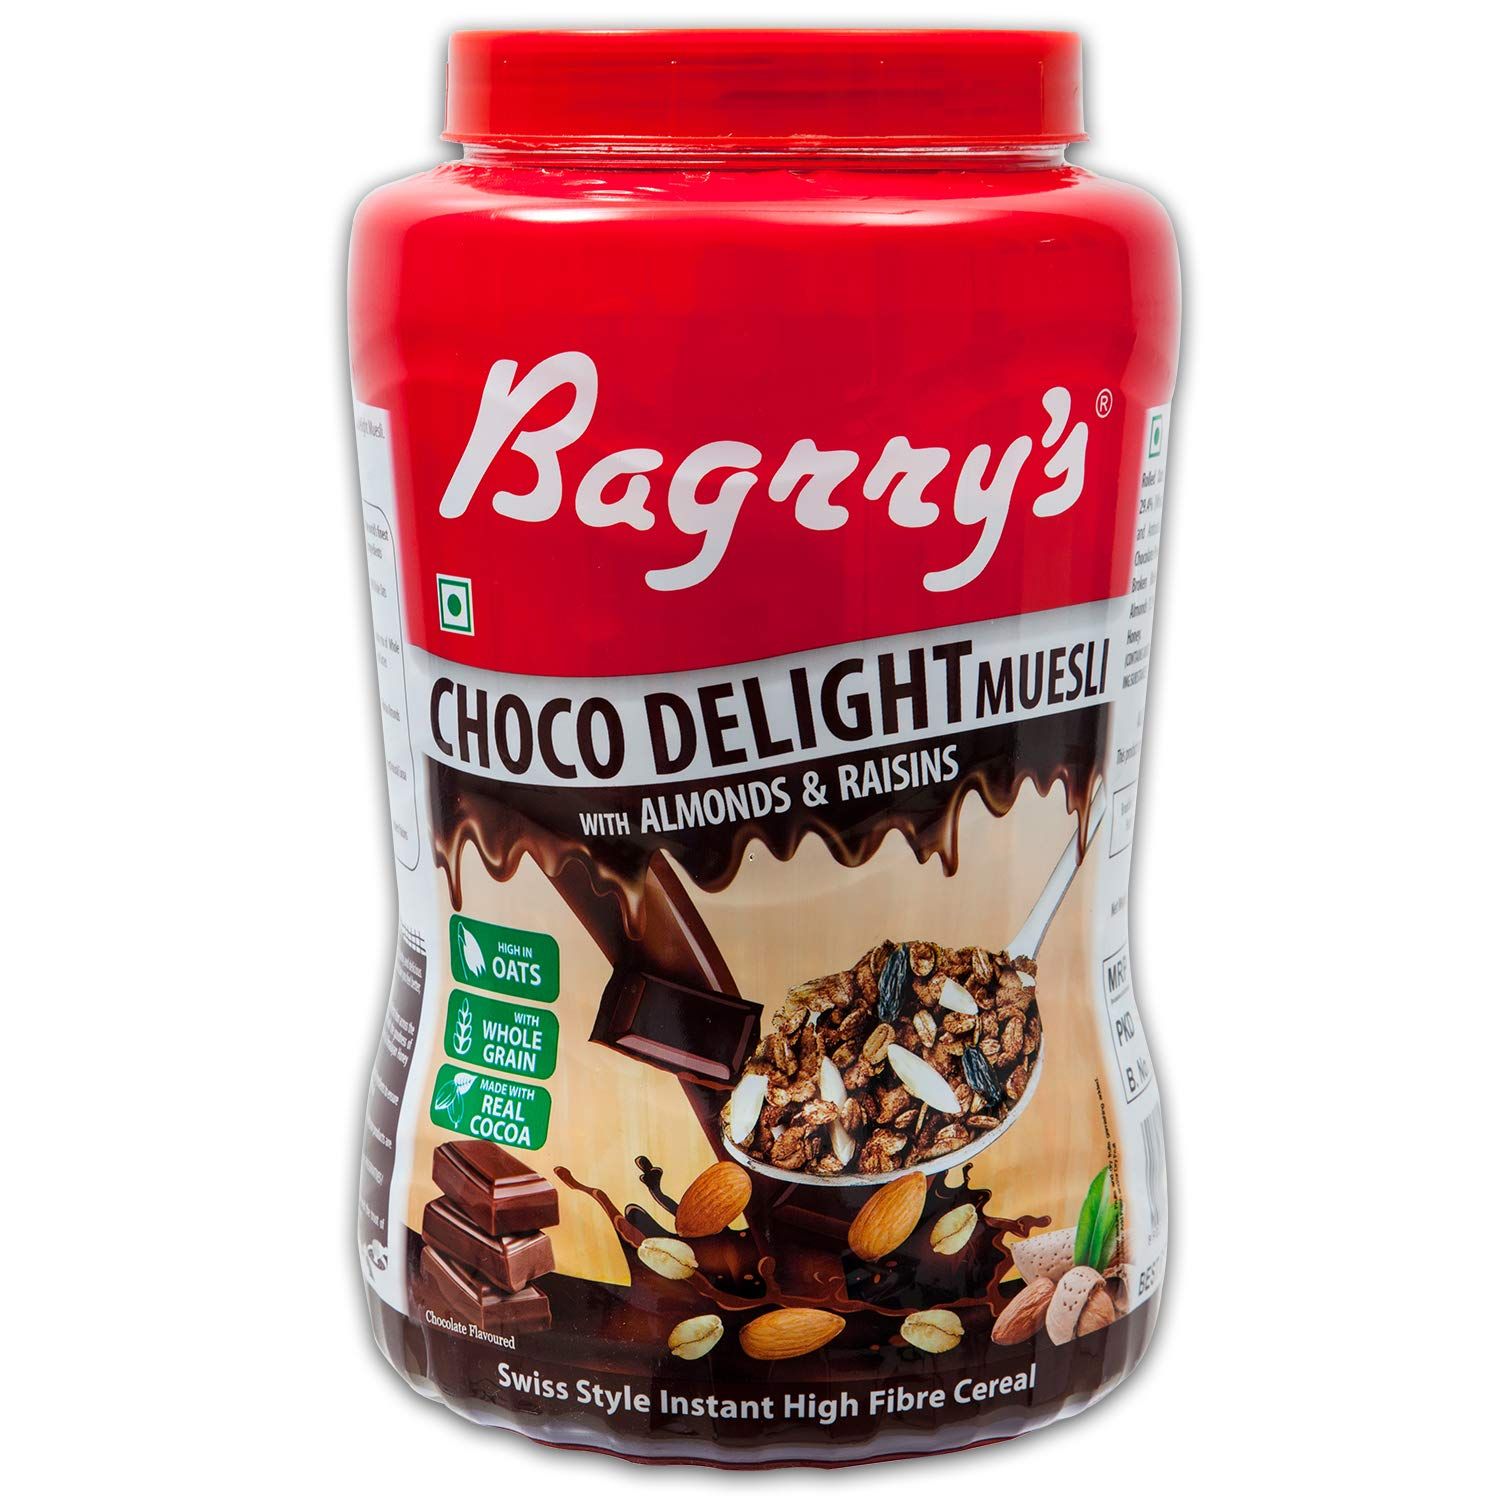 Bagrry's Choco Delight Muesli With Almonds And Raisins Image